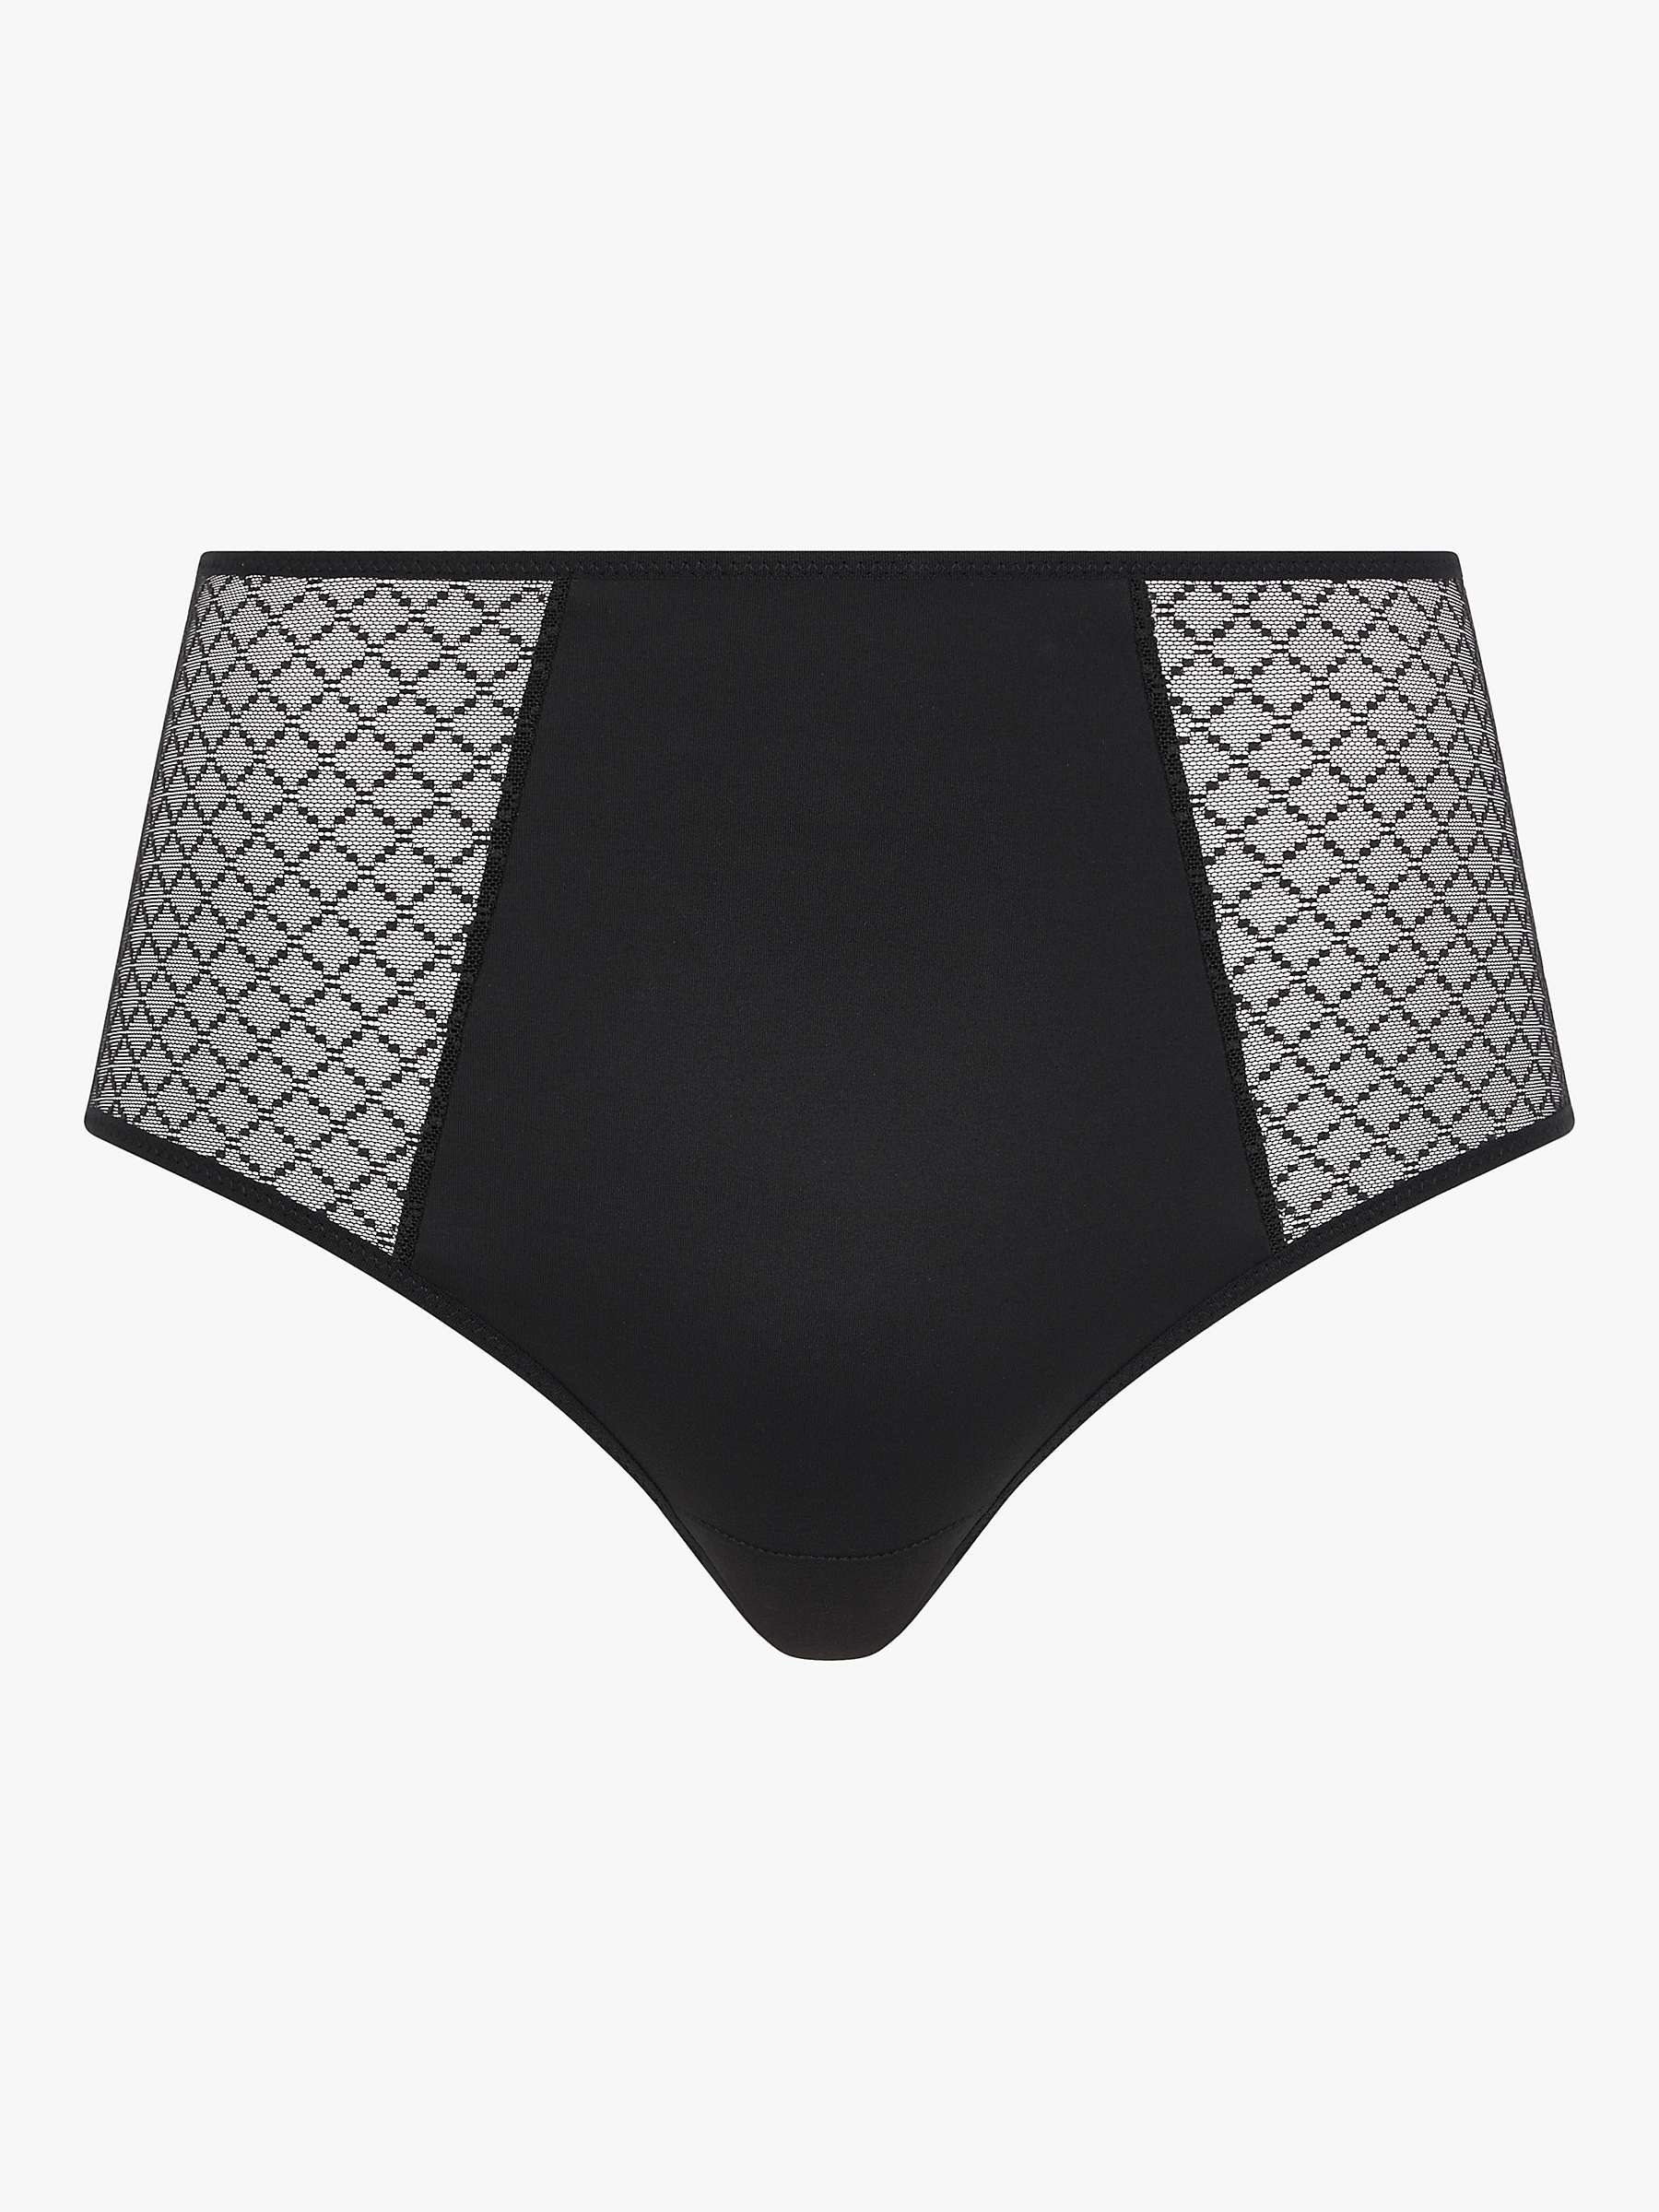 Buy Chantelle Norah Chic High Waisted Briefs Online at johnlewis.com